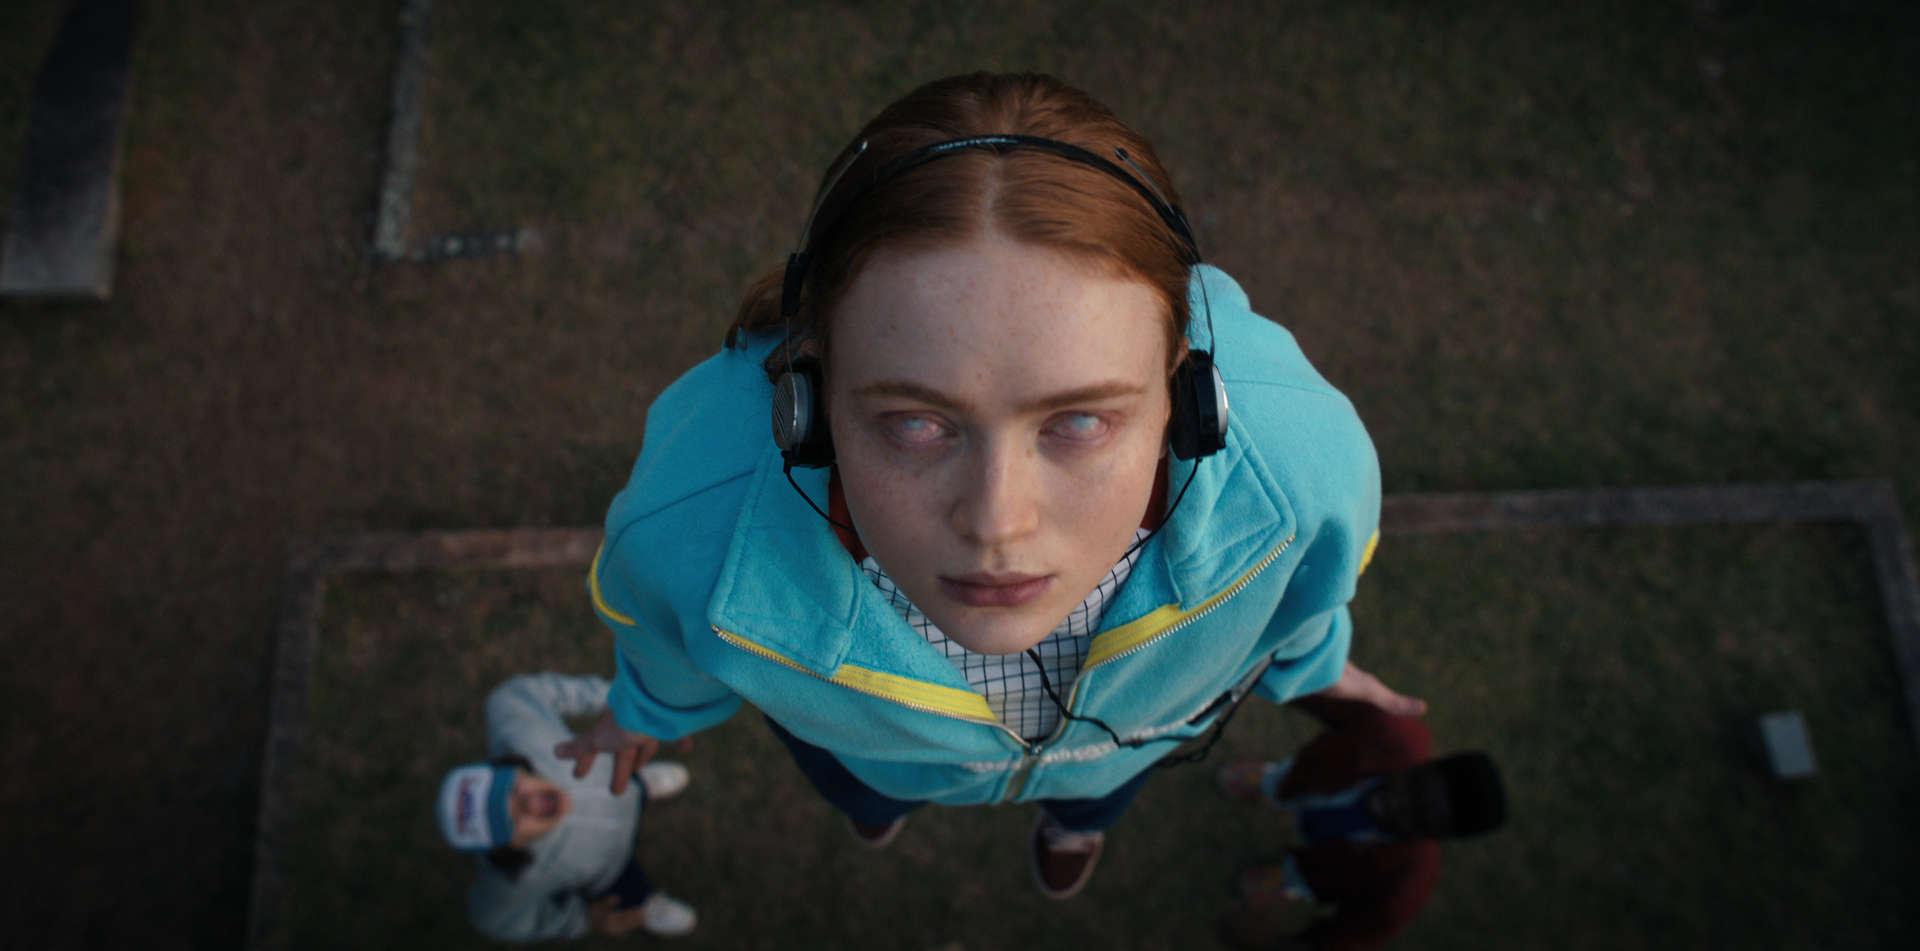 A girl levitates with her eye rolled back in this image from 21 Laps Entertainment